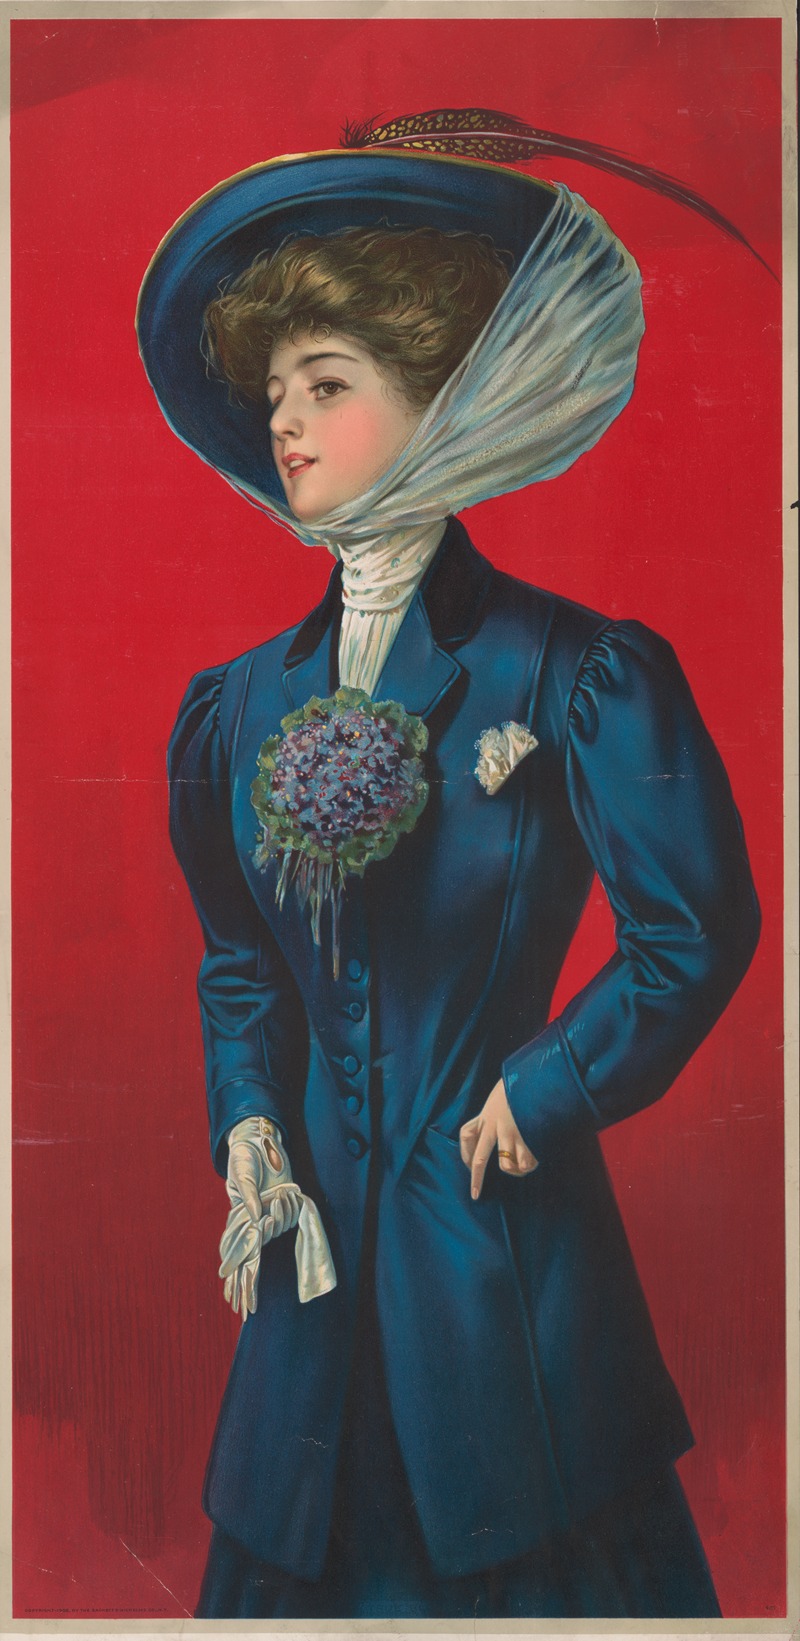 Sackett & Wilhelms Co. - Woman in blue hat and coat with flower corsage on lapel